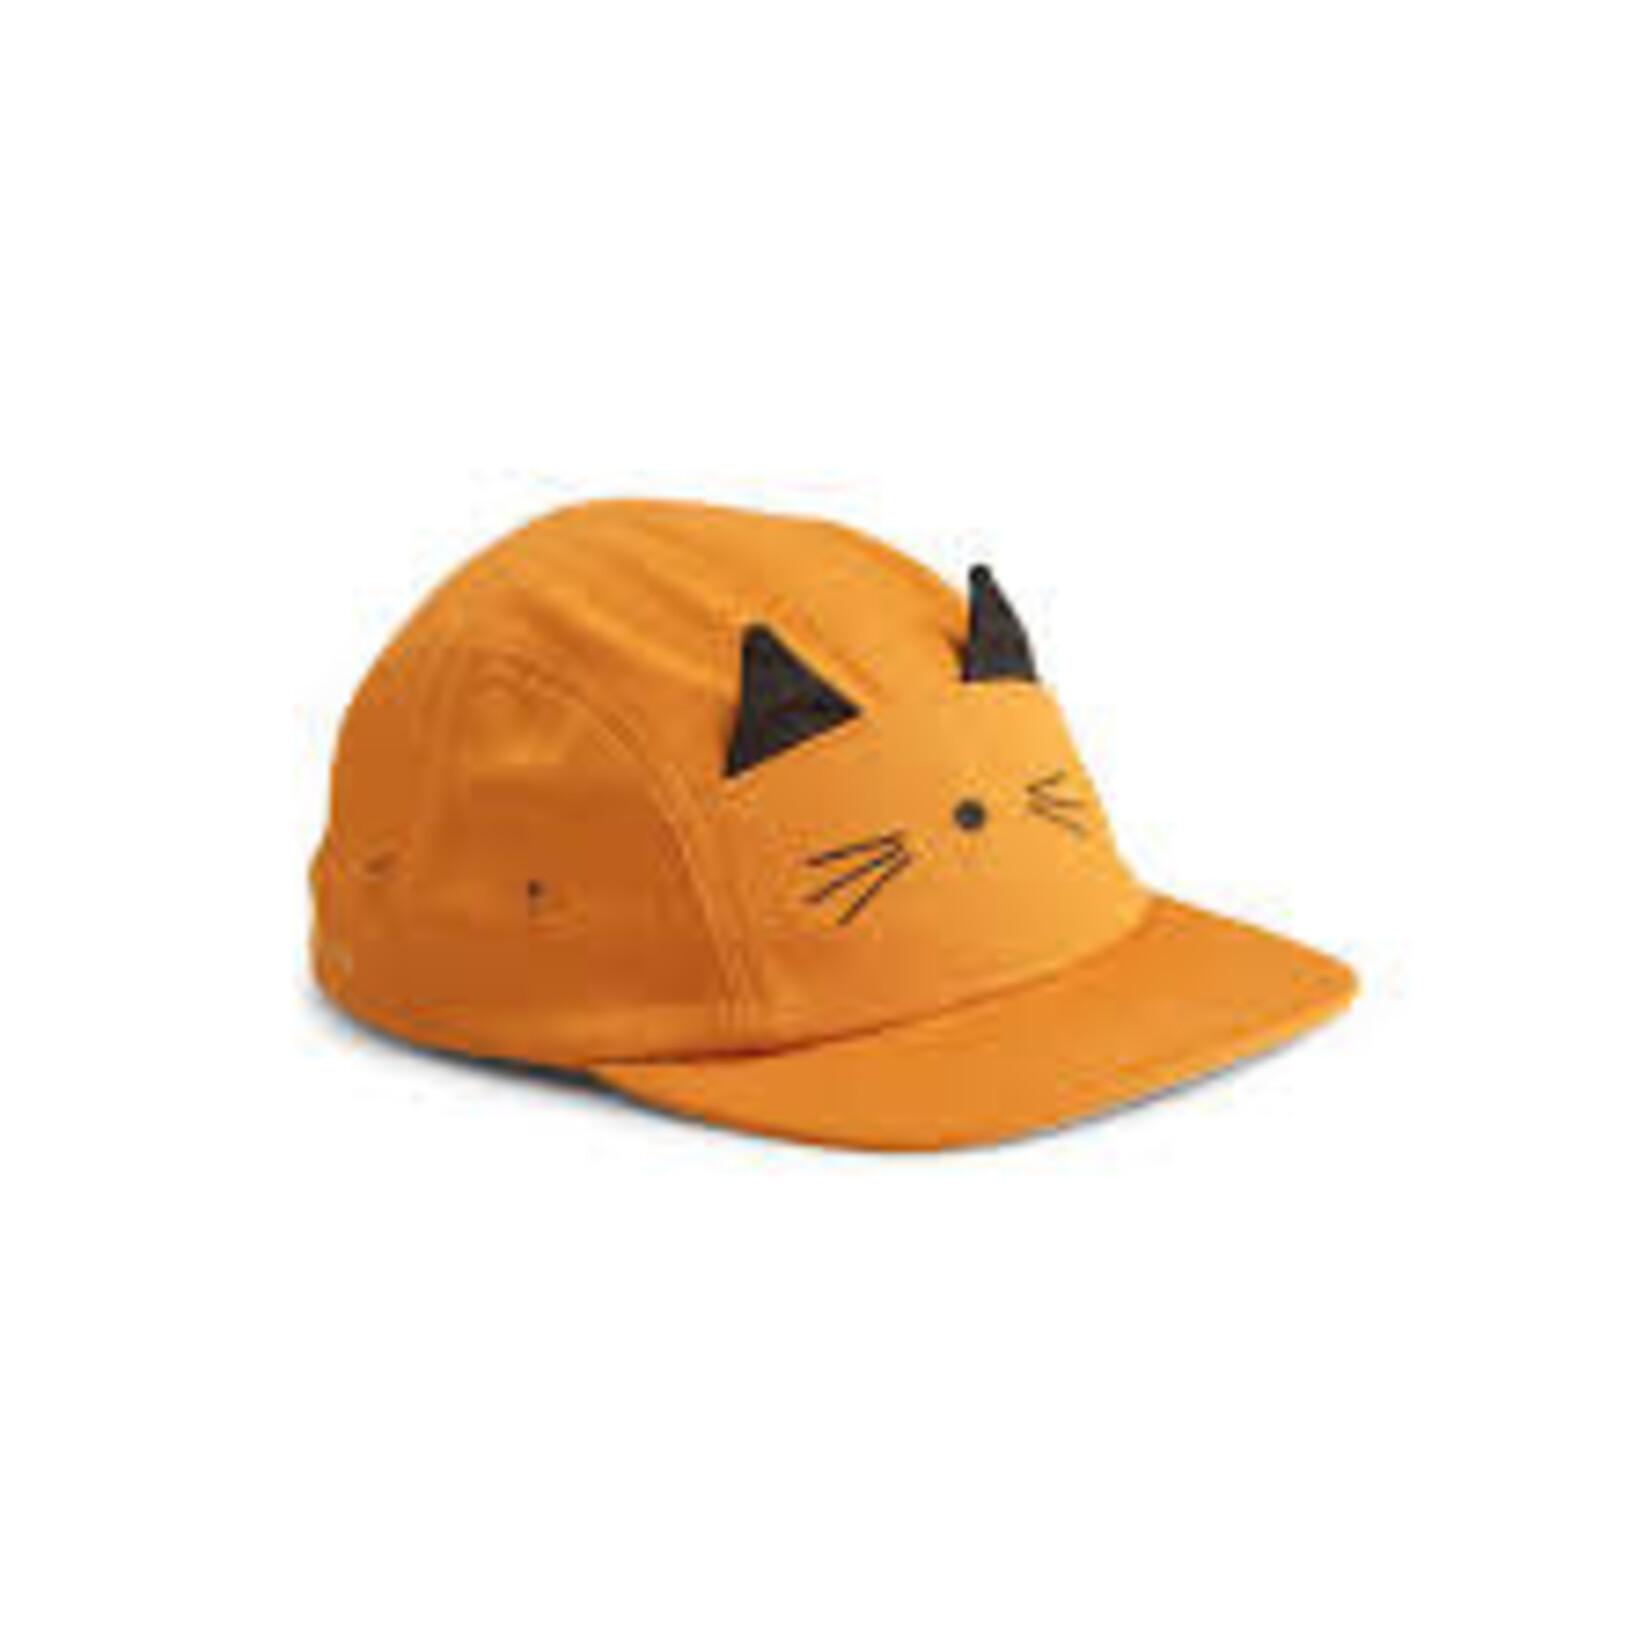 Liewood Rory casquette enfant cat mustard